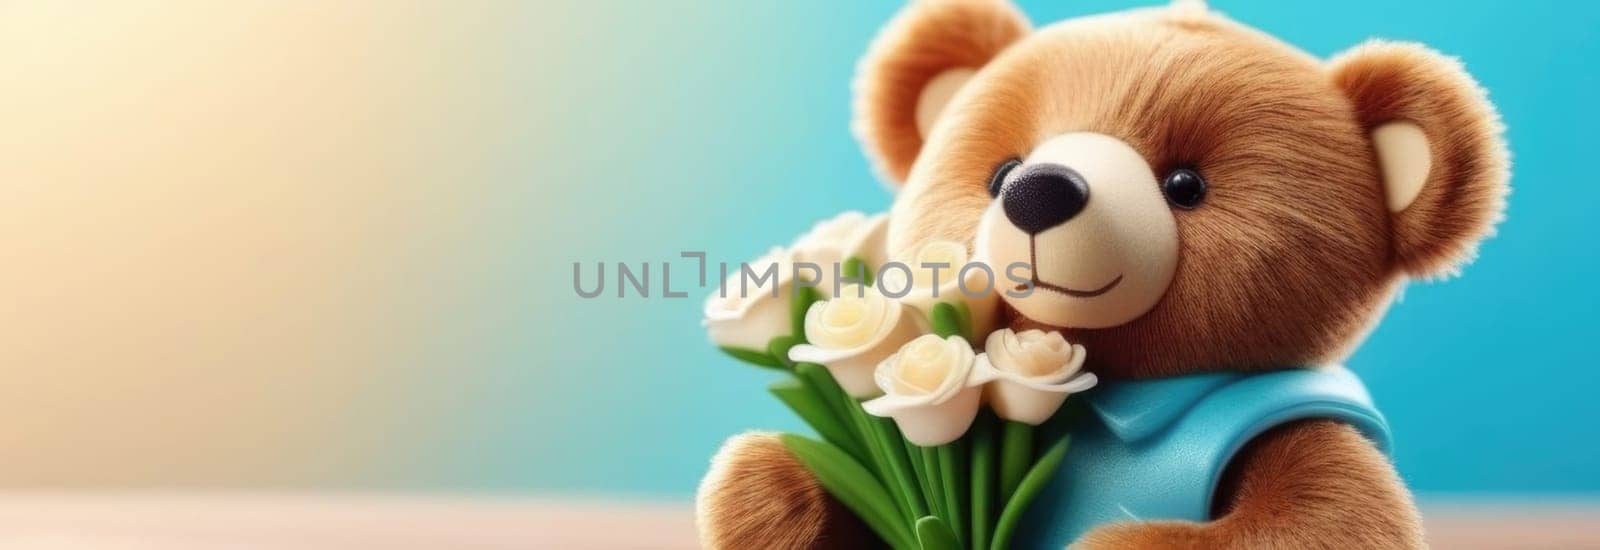 Teddy bear is holding bouquet of flowers isolated on pastel background. Concept of birthday and warmth, affection as teddy bear is symbol of love and comfort. Flowers add touch of beauty, color. by Angelsmoon